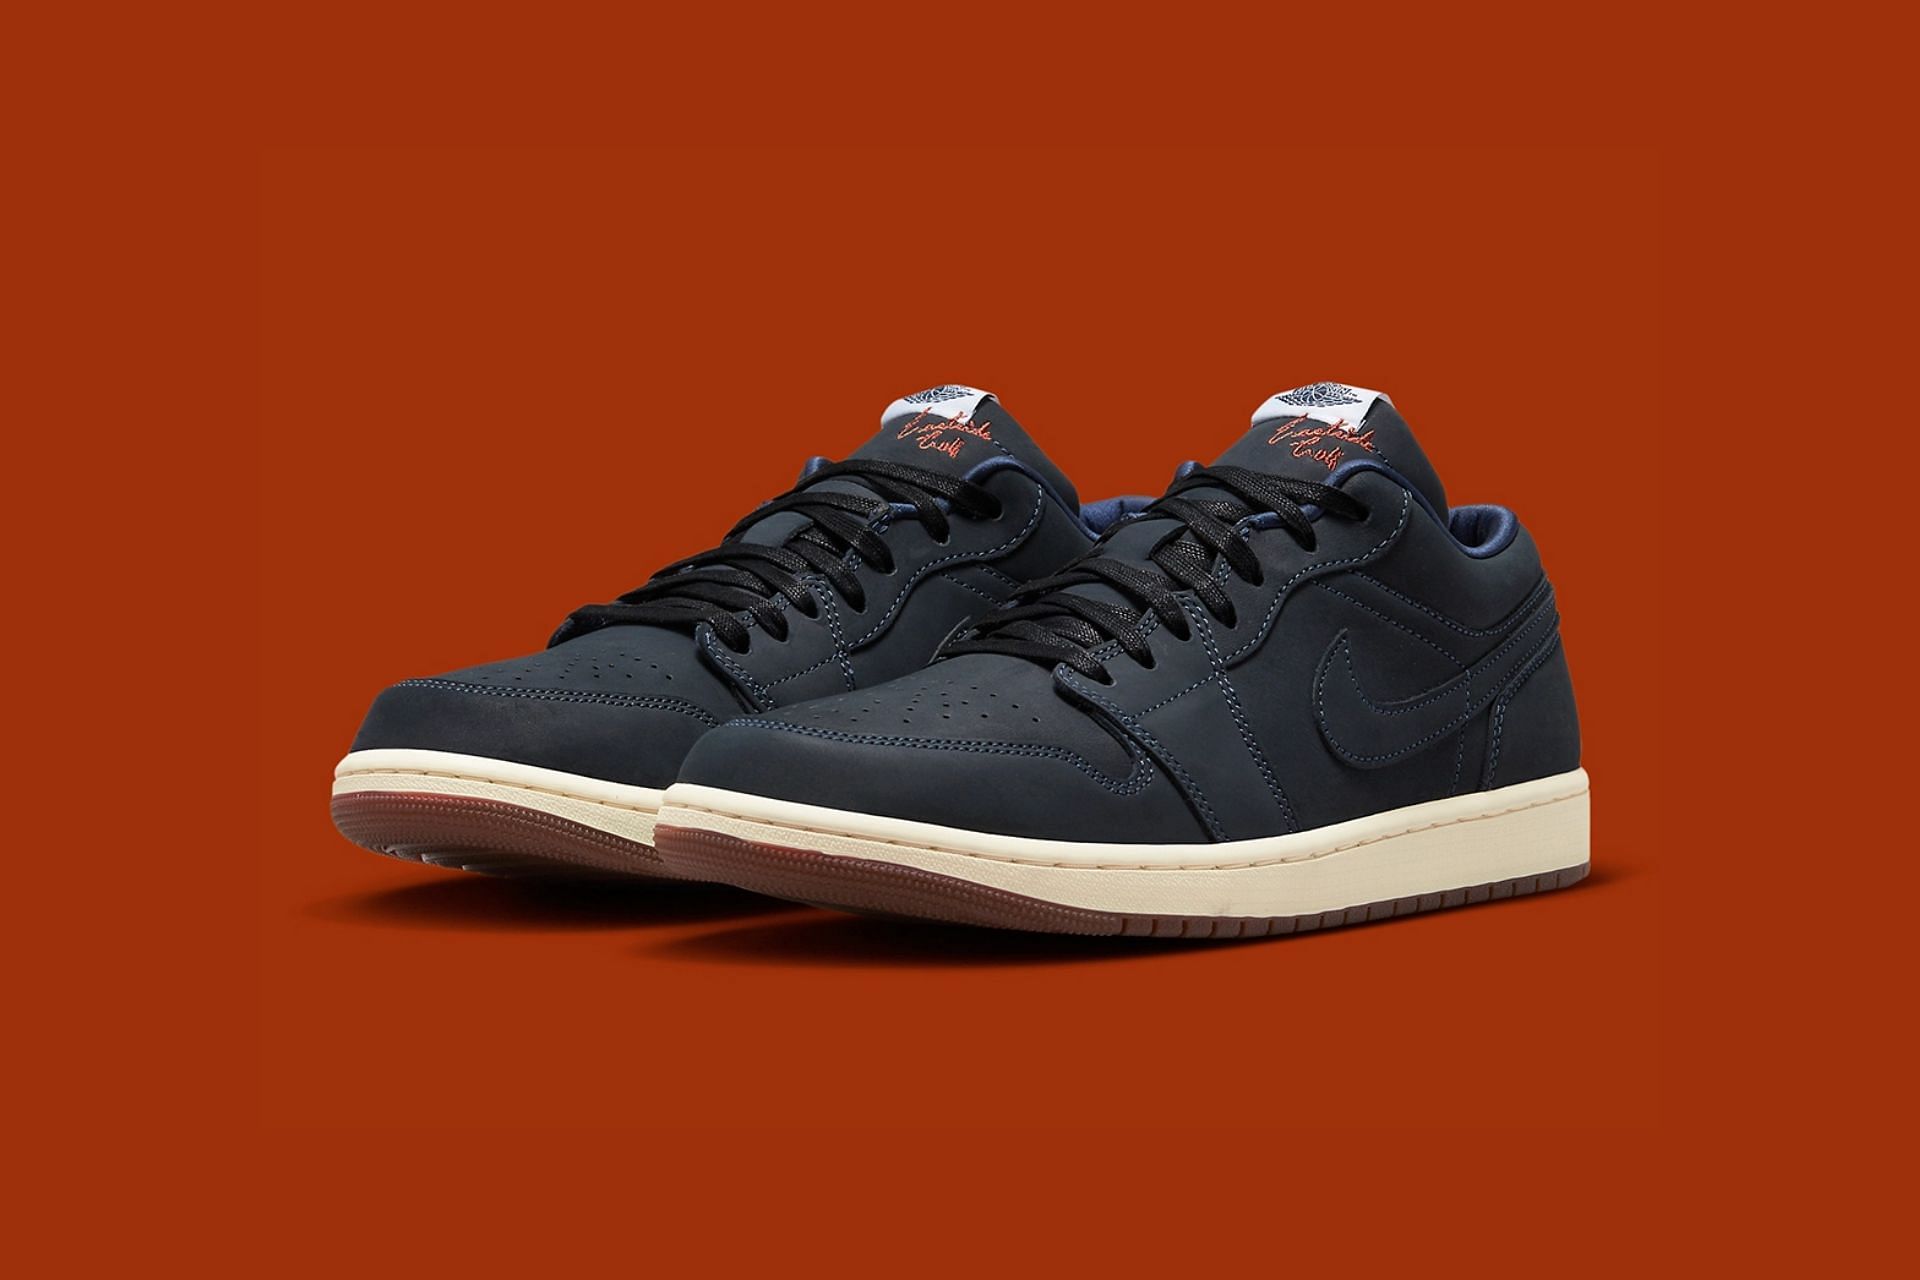 Where to buy Eastside Golf x Air Jordan 1 Low shoes? Price and